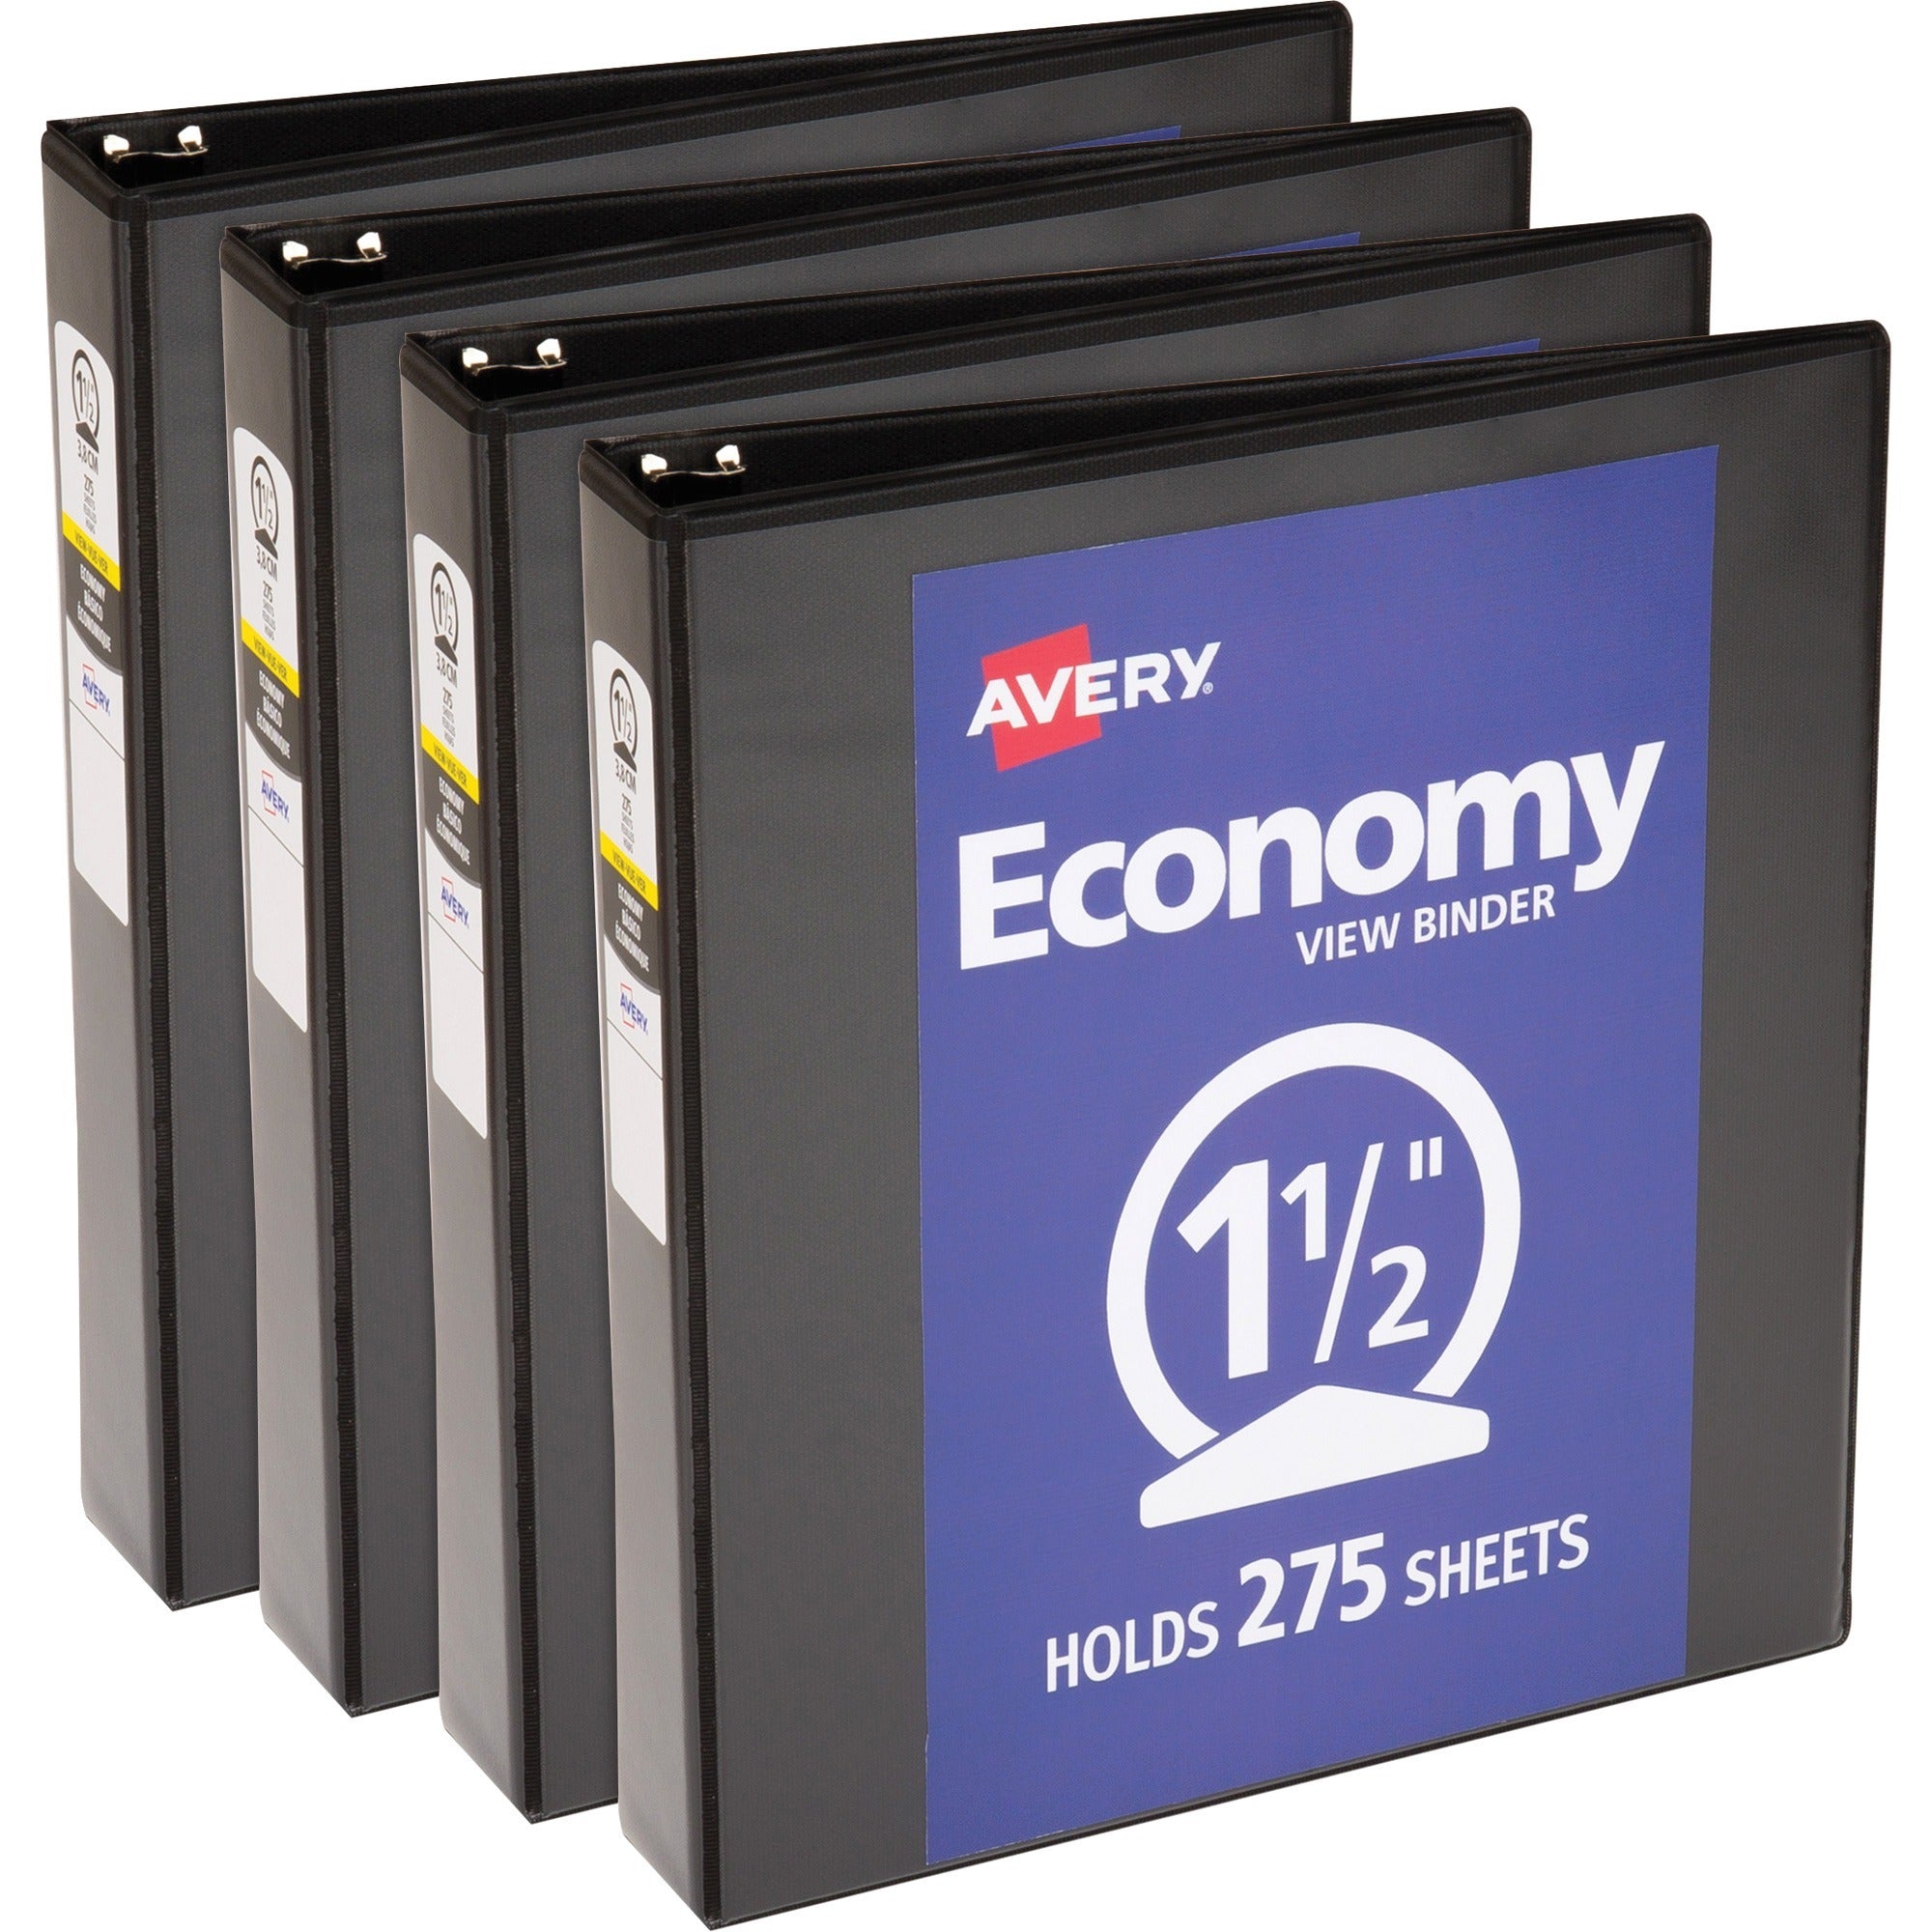 avery-economy-view-binder_ave05725bd - 1